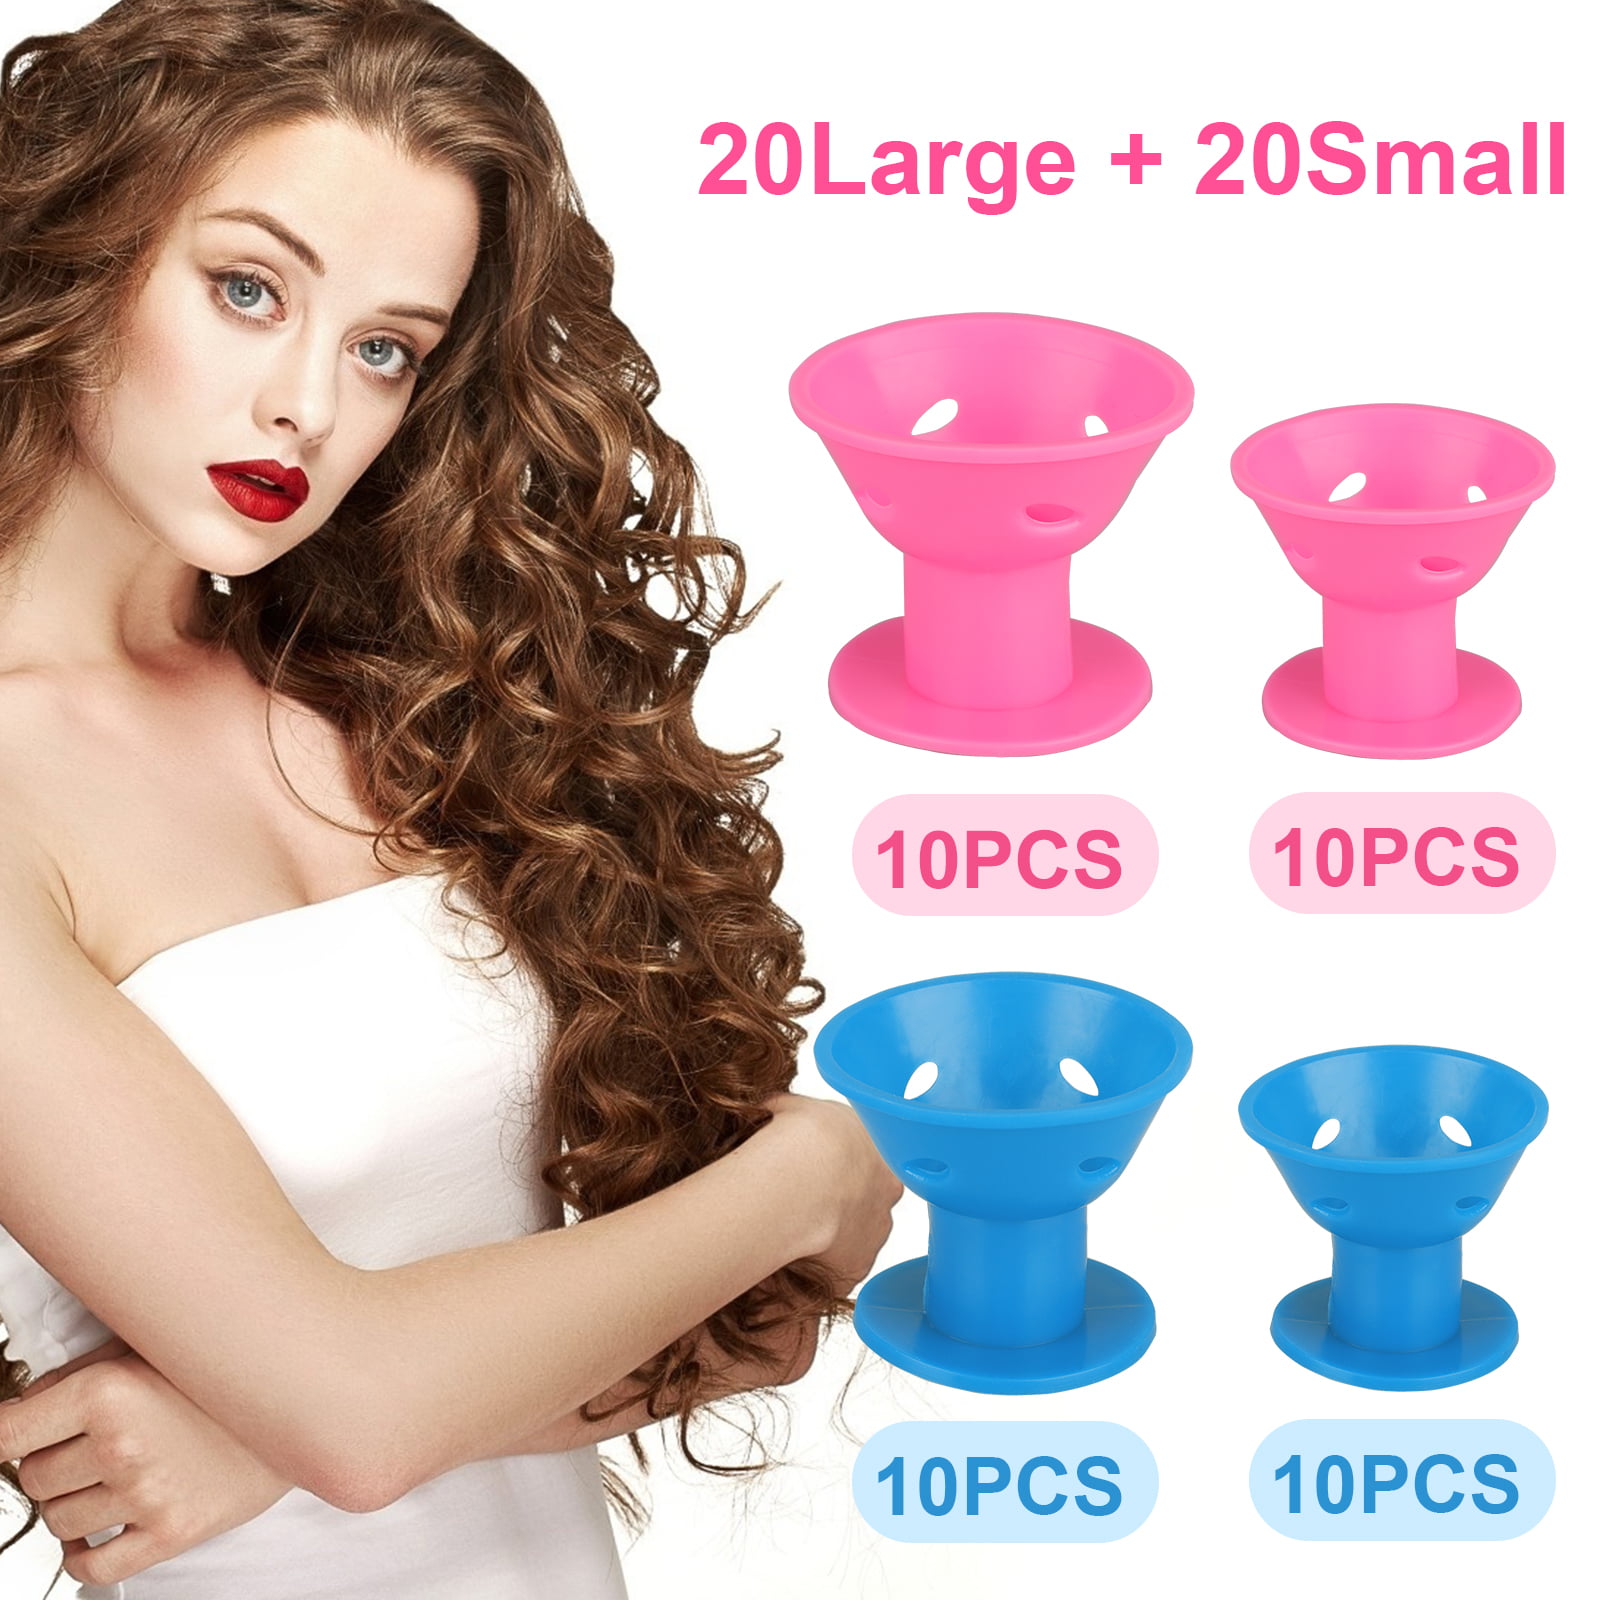 TSV 40/10pcs Silicone Hair Curlers, Magic Hair Curlers Roller, Blue and  Pink Magic Hair Rollers Set, Hair Curler Styling Tool Soft Magic DIY  Curling Hairstyle Tools Hair Accessories 